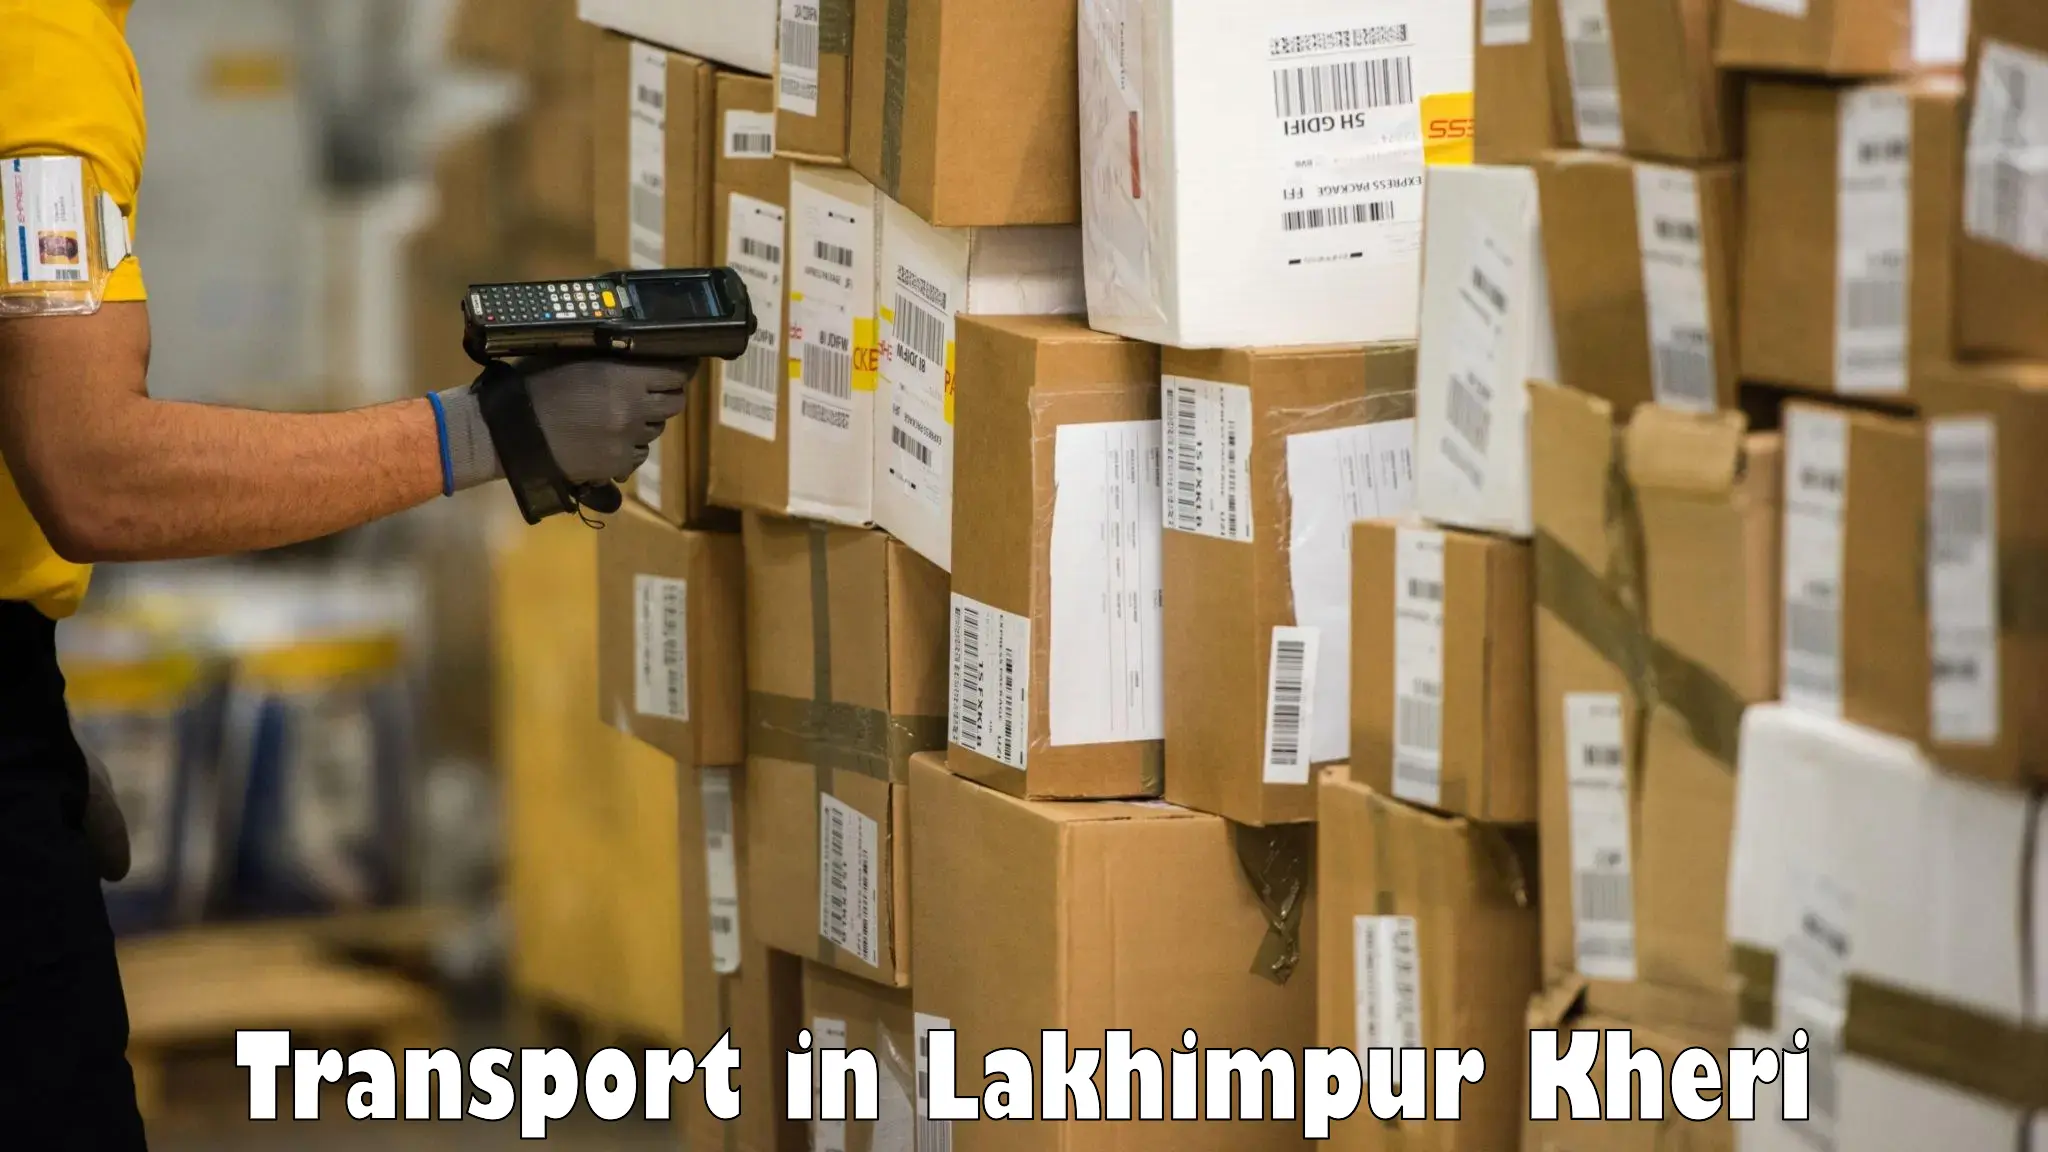 Package delivery services in Lakhimpur Kheri